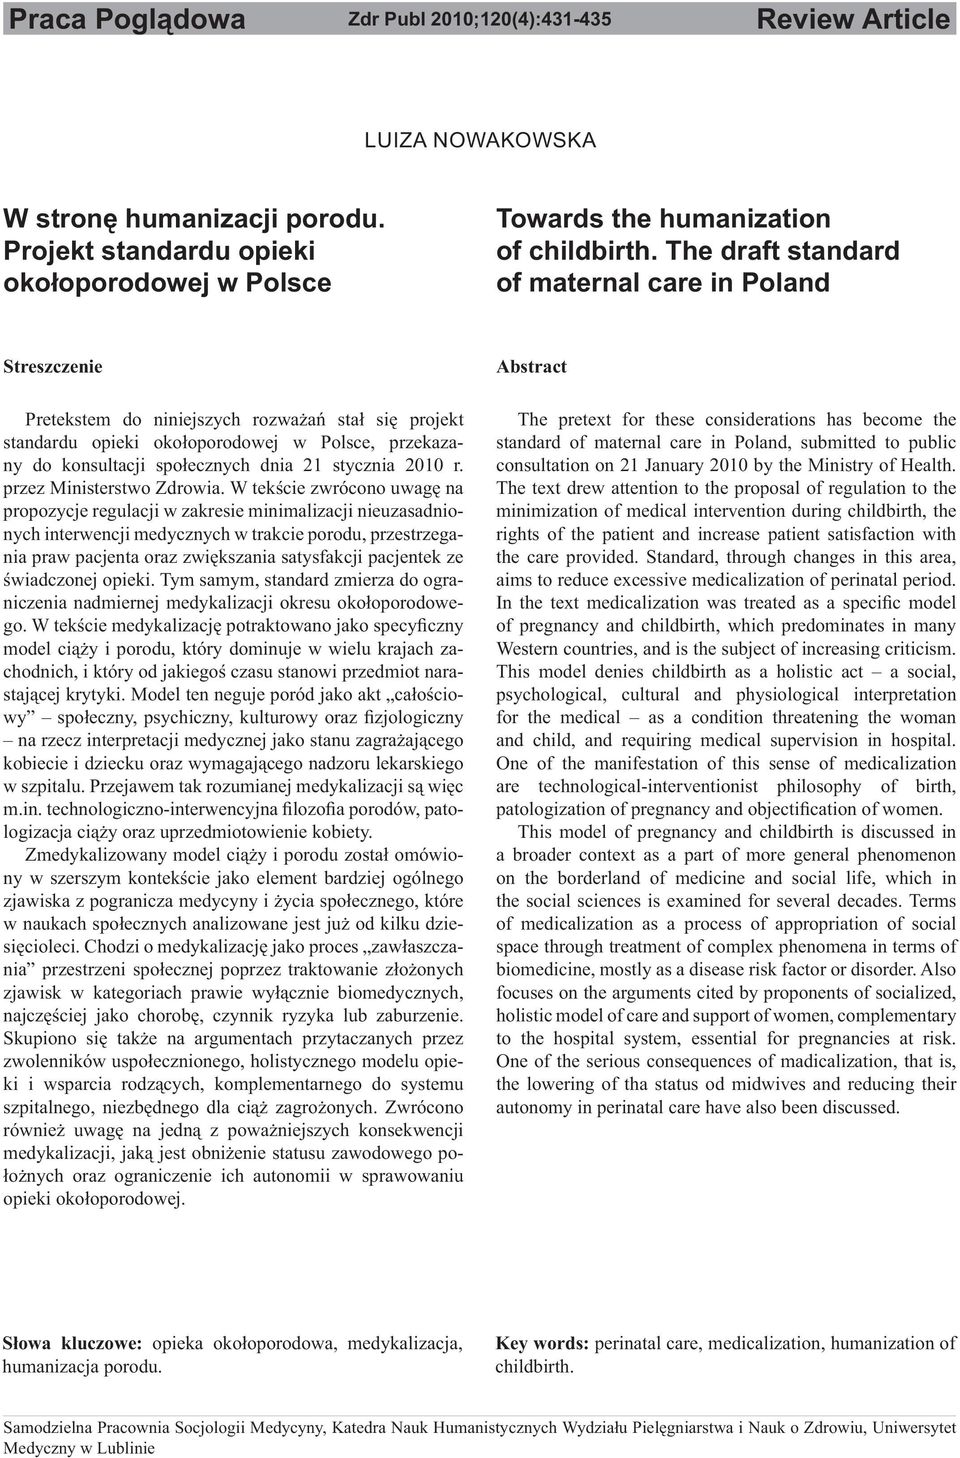 Abstract The pretext for these considerations has become the standard of maternal care in Poland, submitted to public consultation on 21 January 2010 by the Ministry of Health.